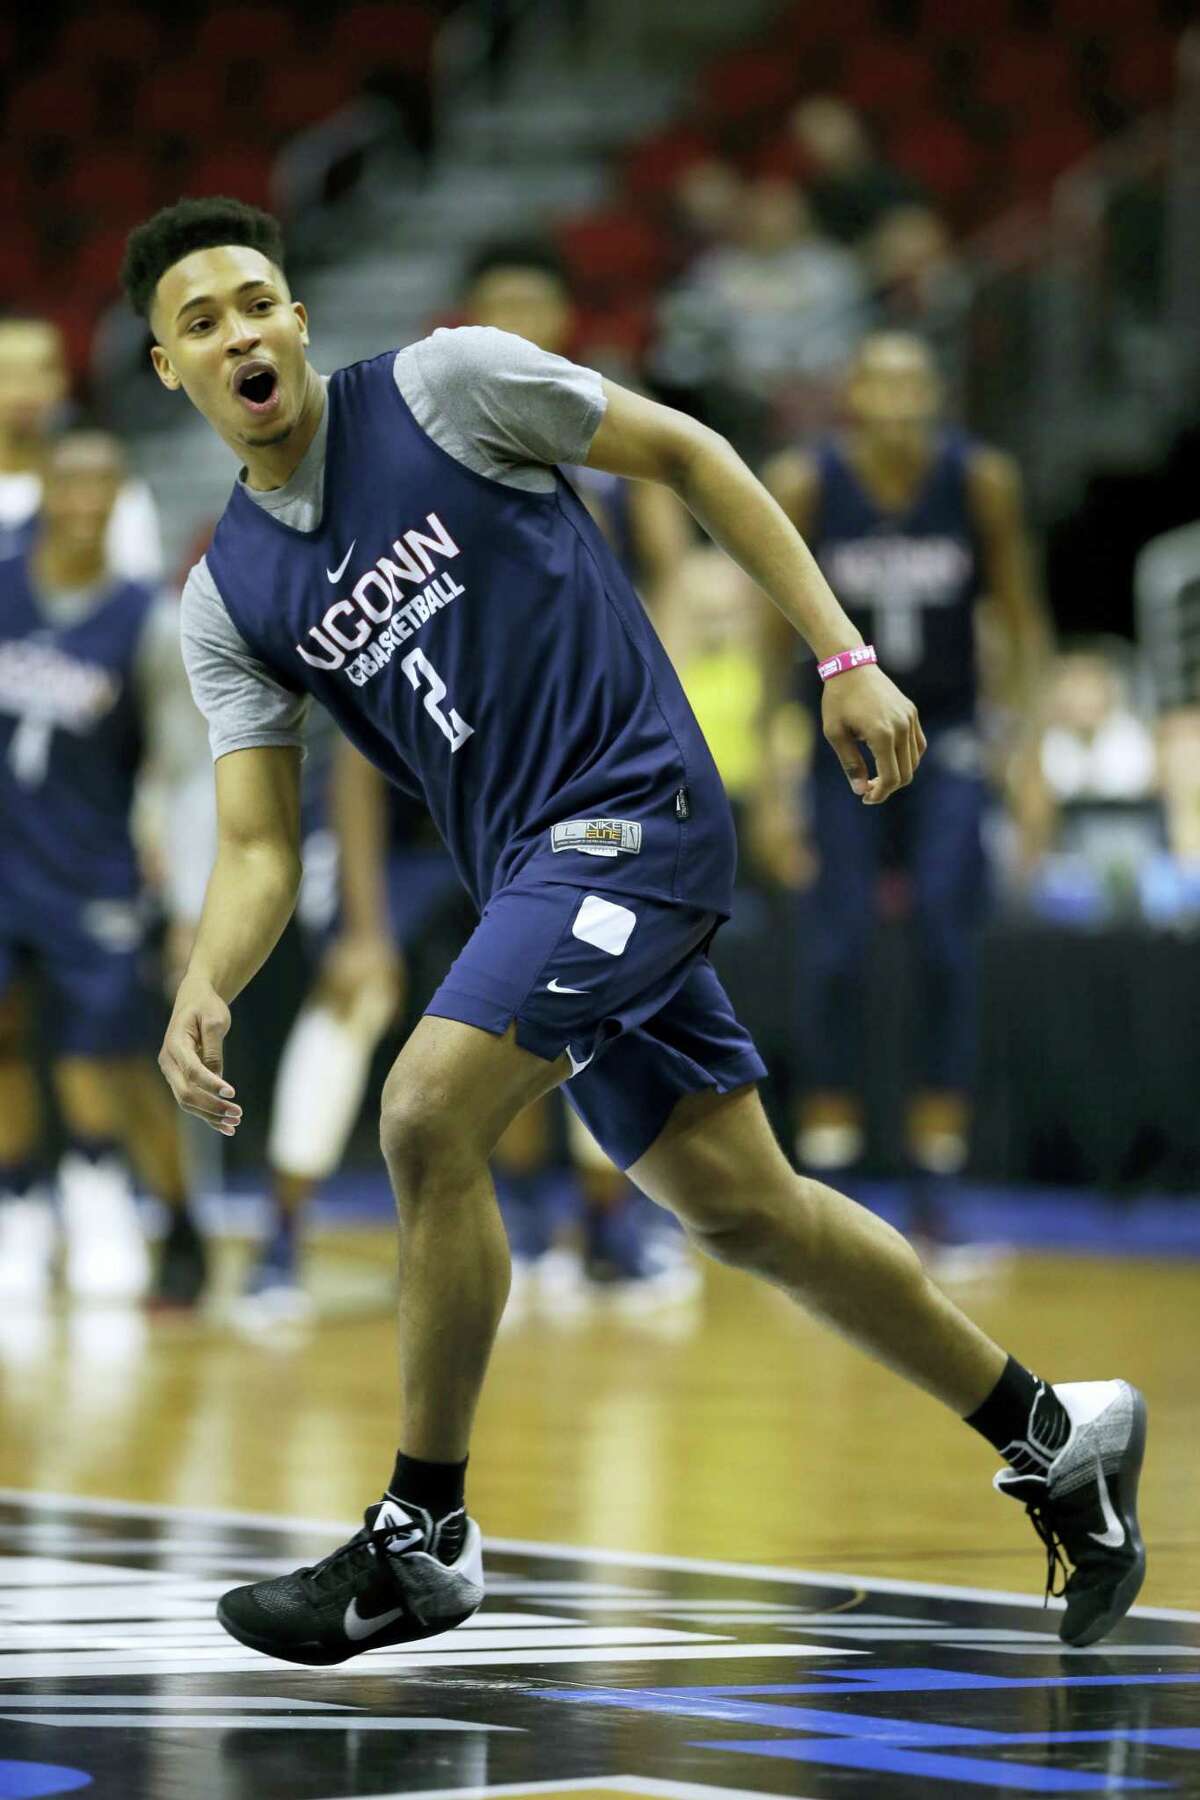 Connecticut guard Jalen Adams reacts after missing a shot during practice for a first-round men's college basketball game in the NCAA Tournament, Wednesday, March 16, 2016, in Des Moines, Iowa. Connecticut will play Colorado on Thursday. (AP Photo/Charlie Neibergall)